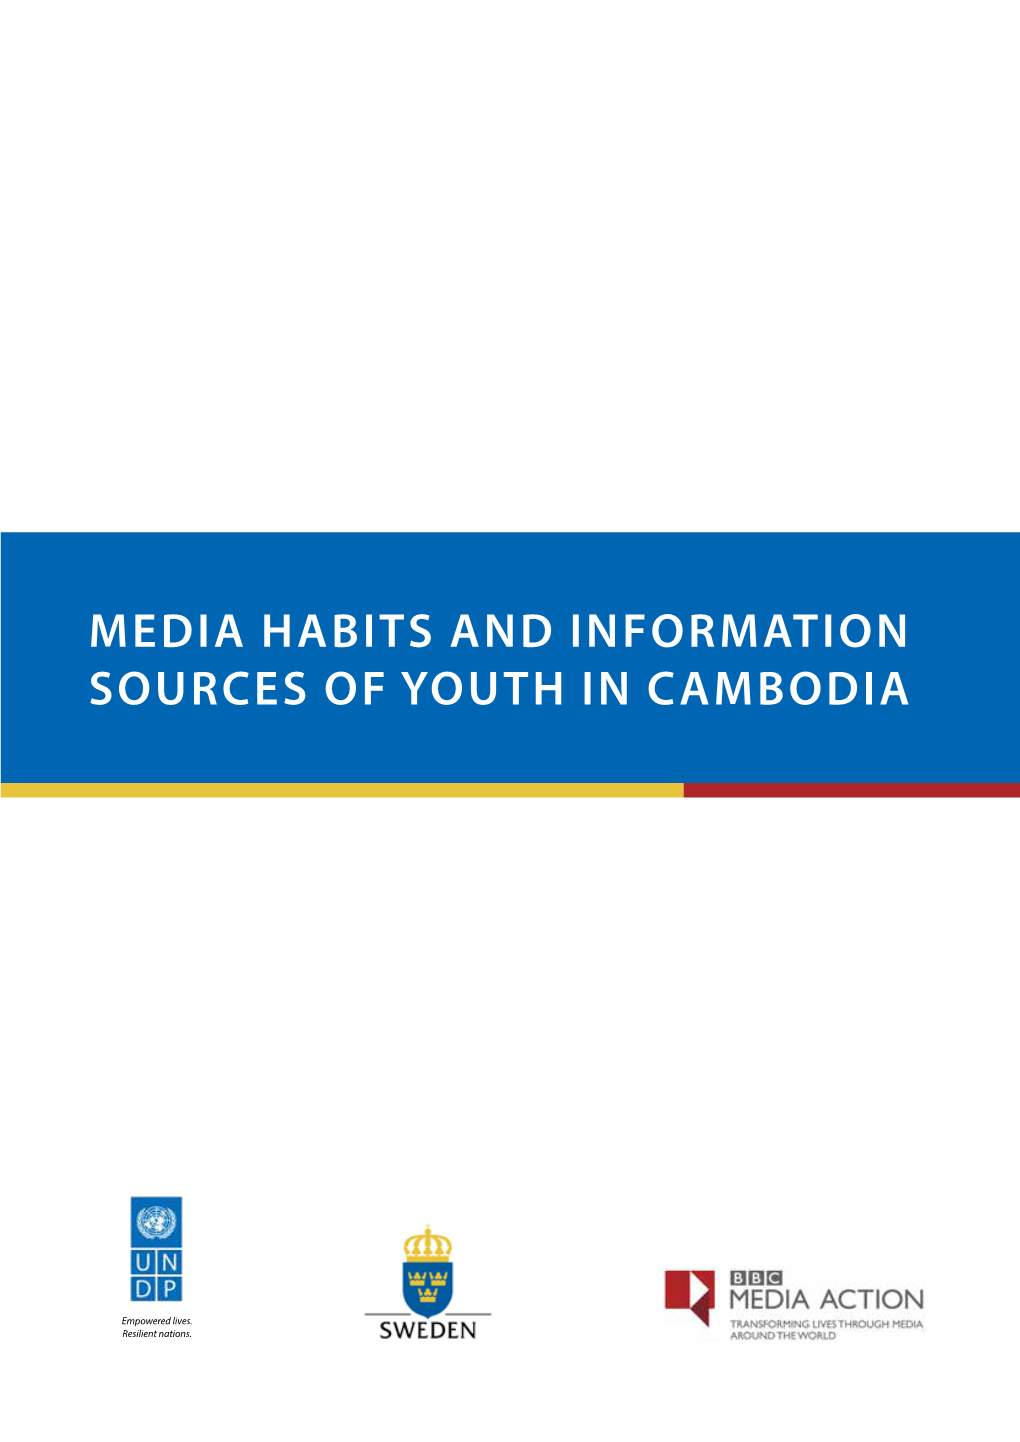 Media Habits and Information Sources of Youth in Cambodia